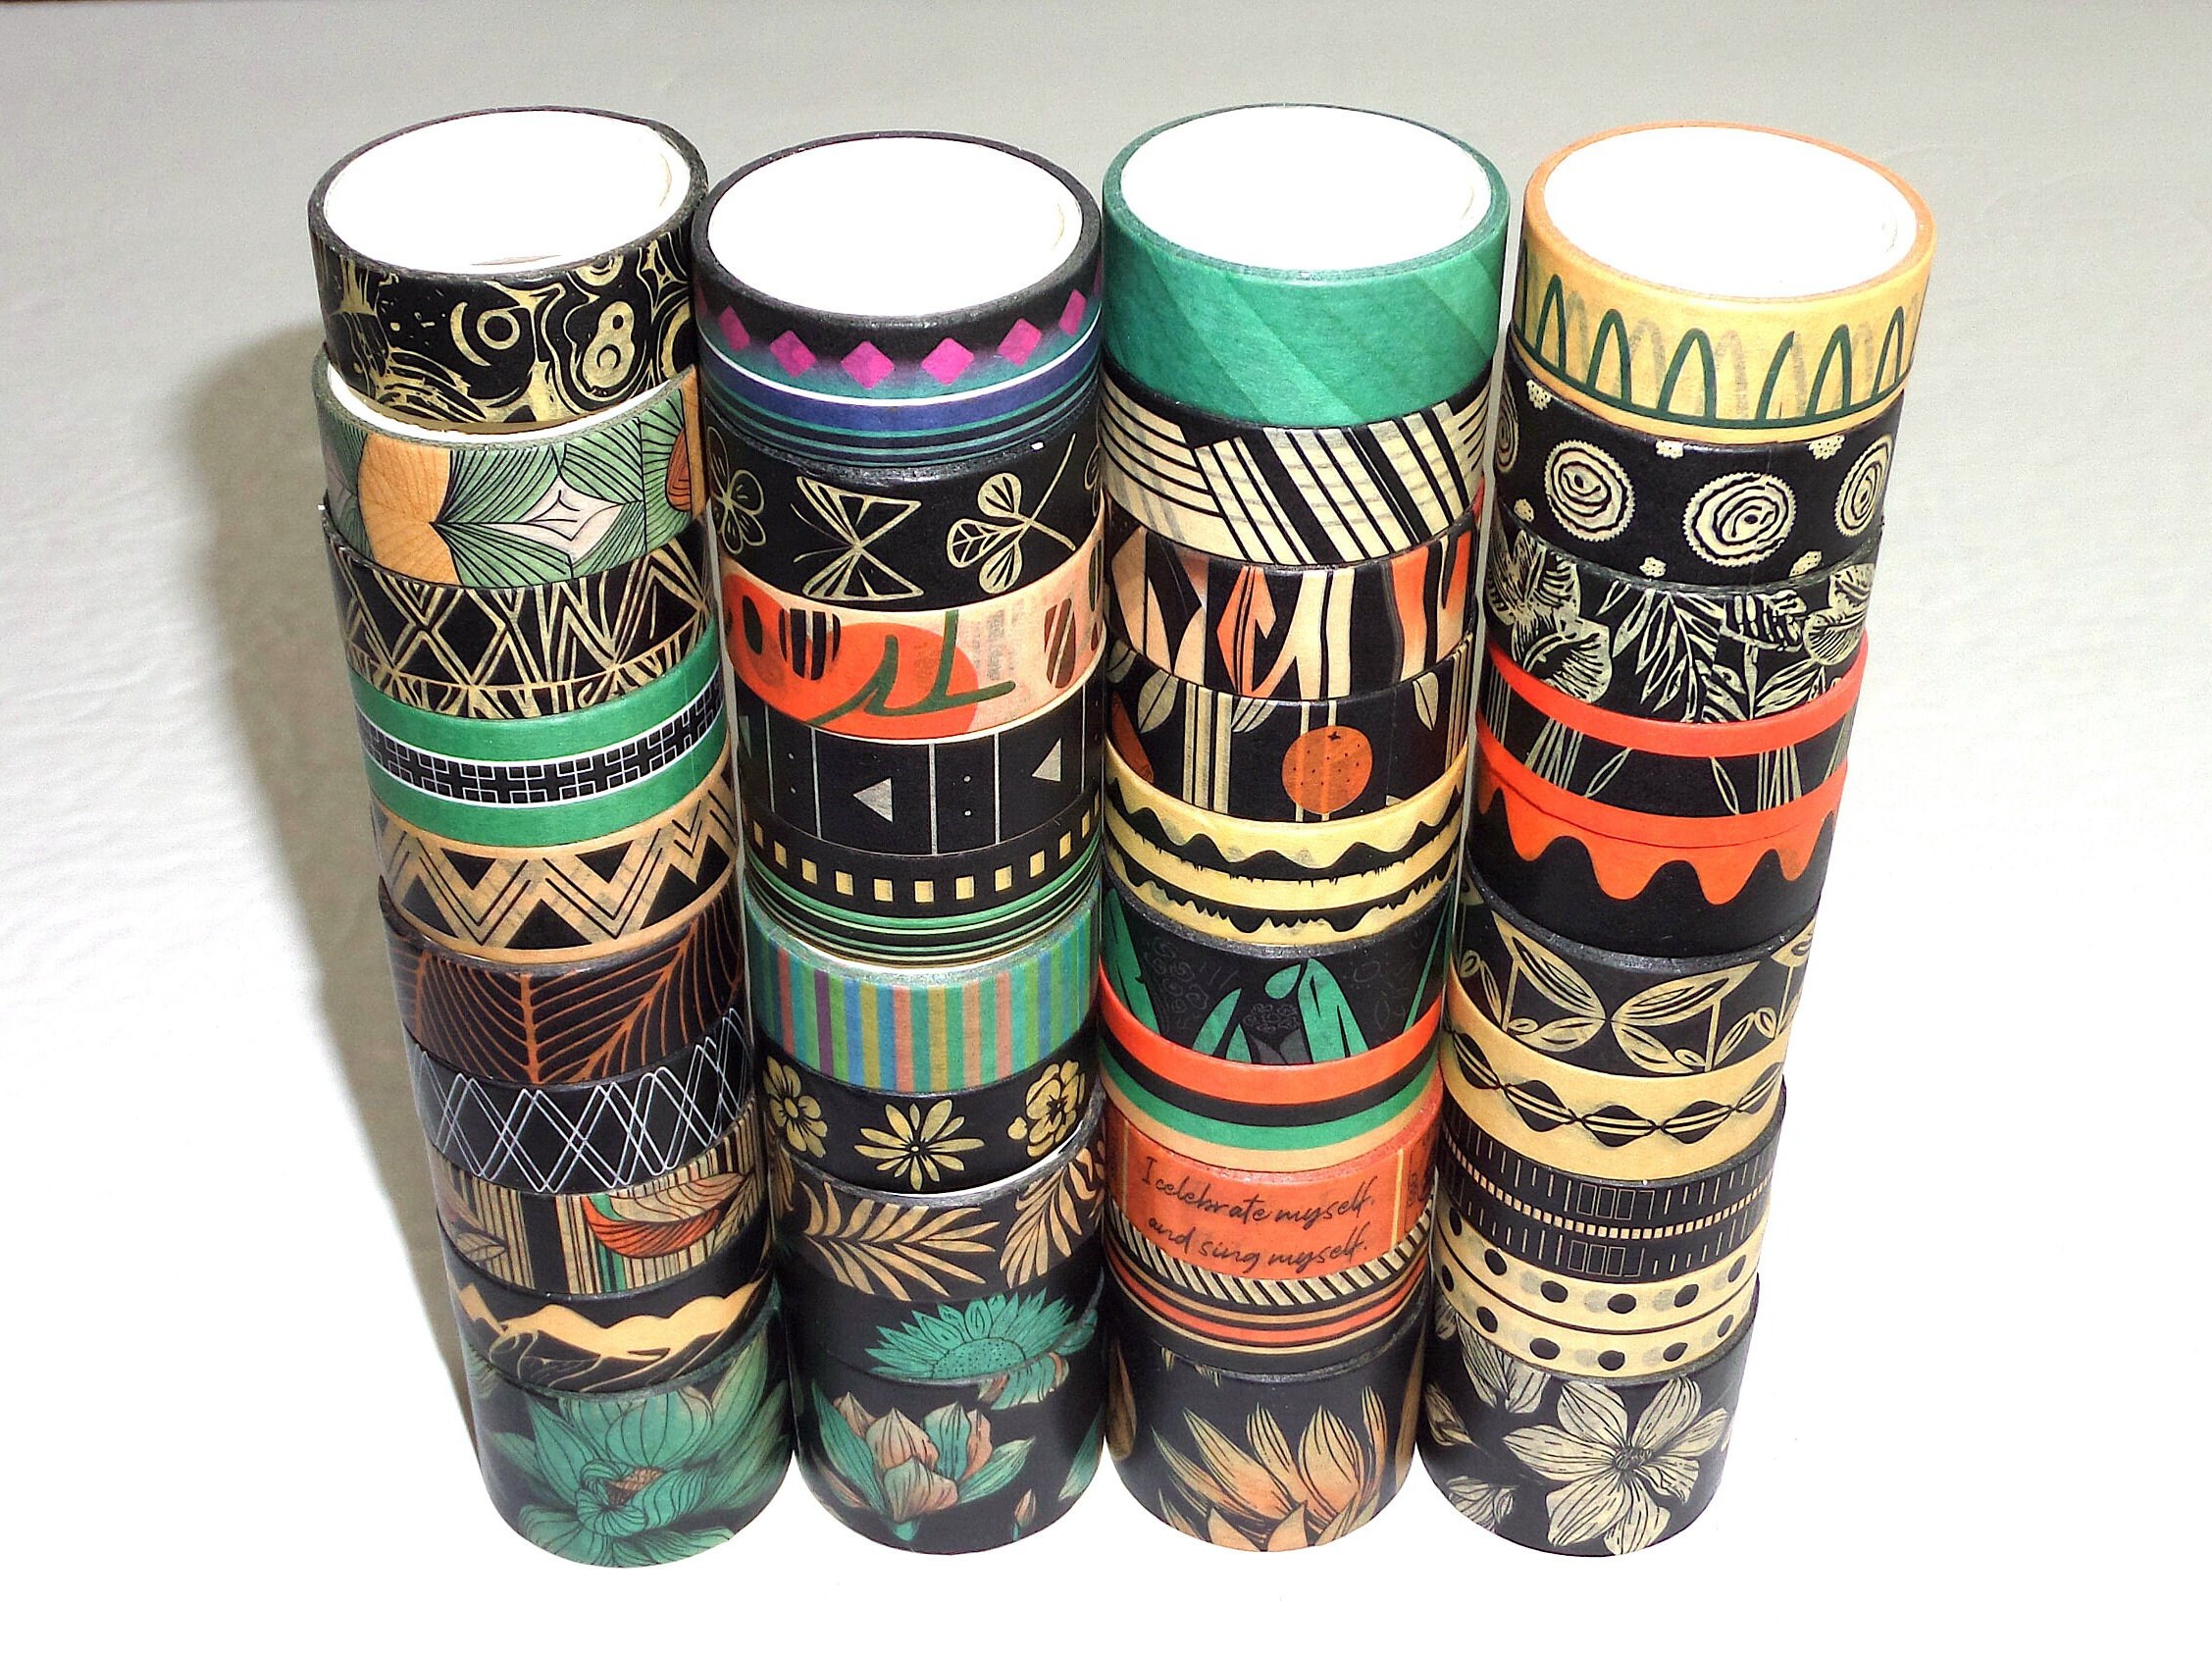 Black Print Washi Tape by Recollections™